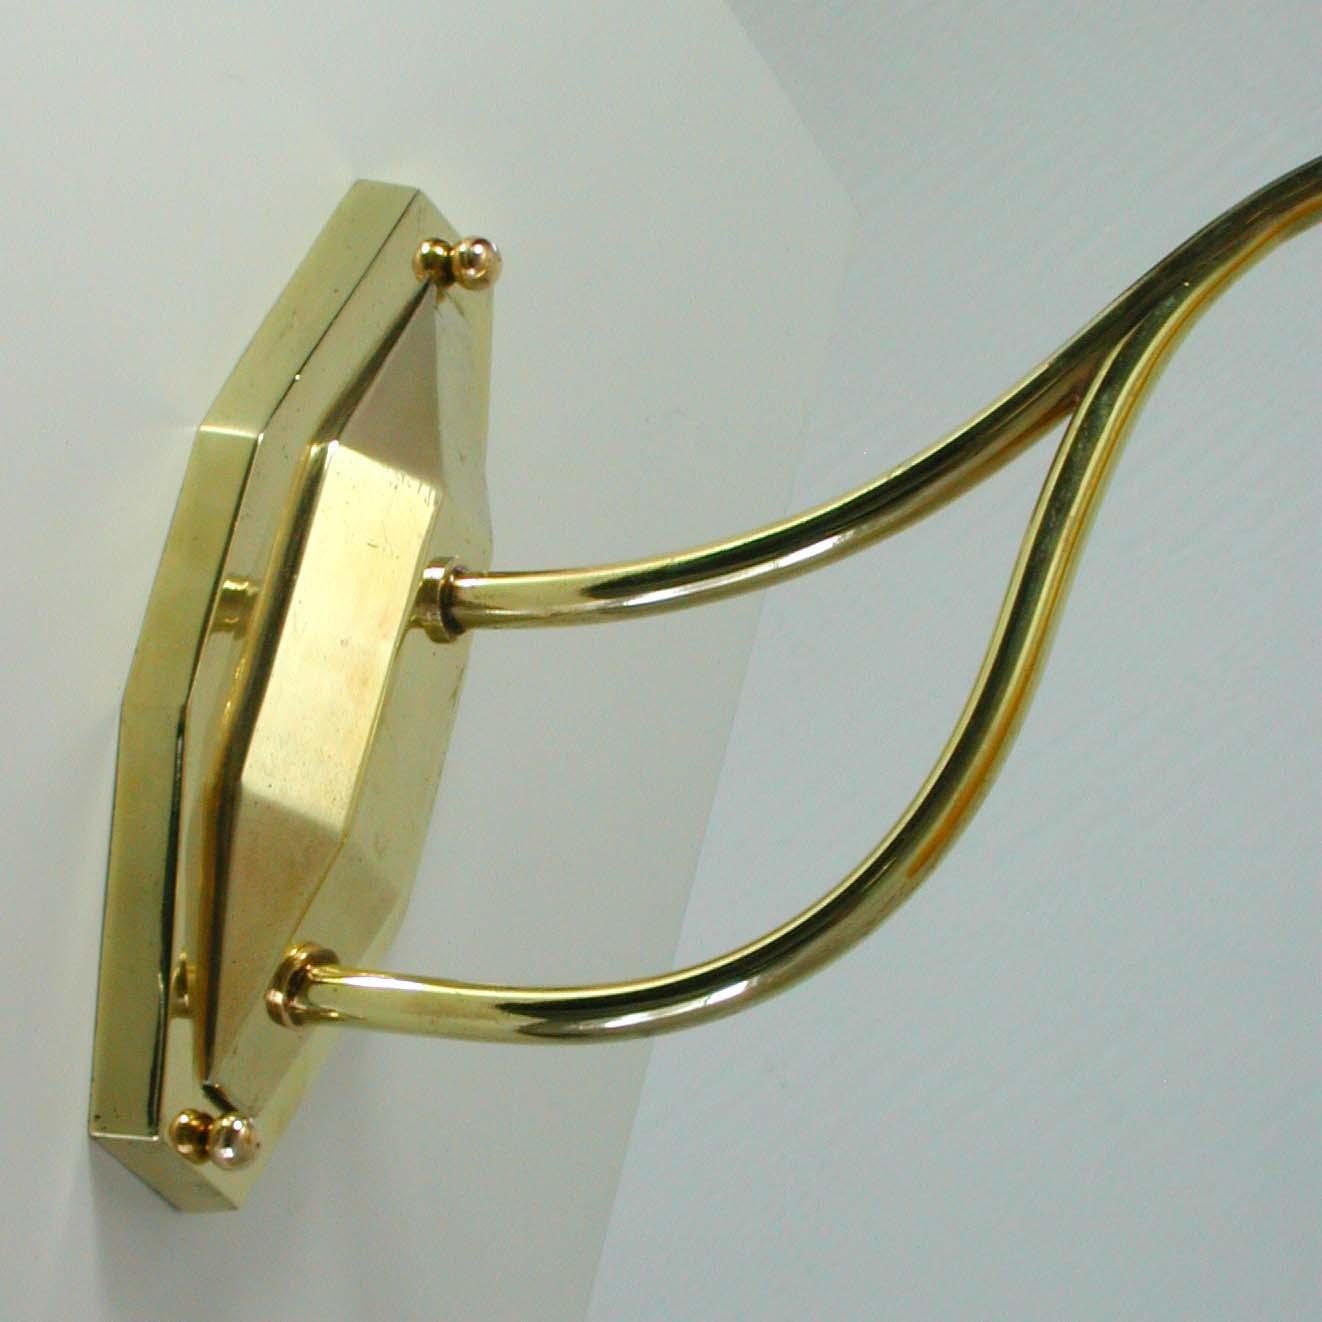 This elegant and very rare midcentury wall light was designed and manufactured in France in the 1950s by Maison ARLUS.

It features a large yellow lacquered metal diabolo lamp shade with brass details and a brass back plate.

The lamp has been